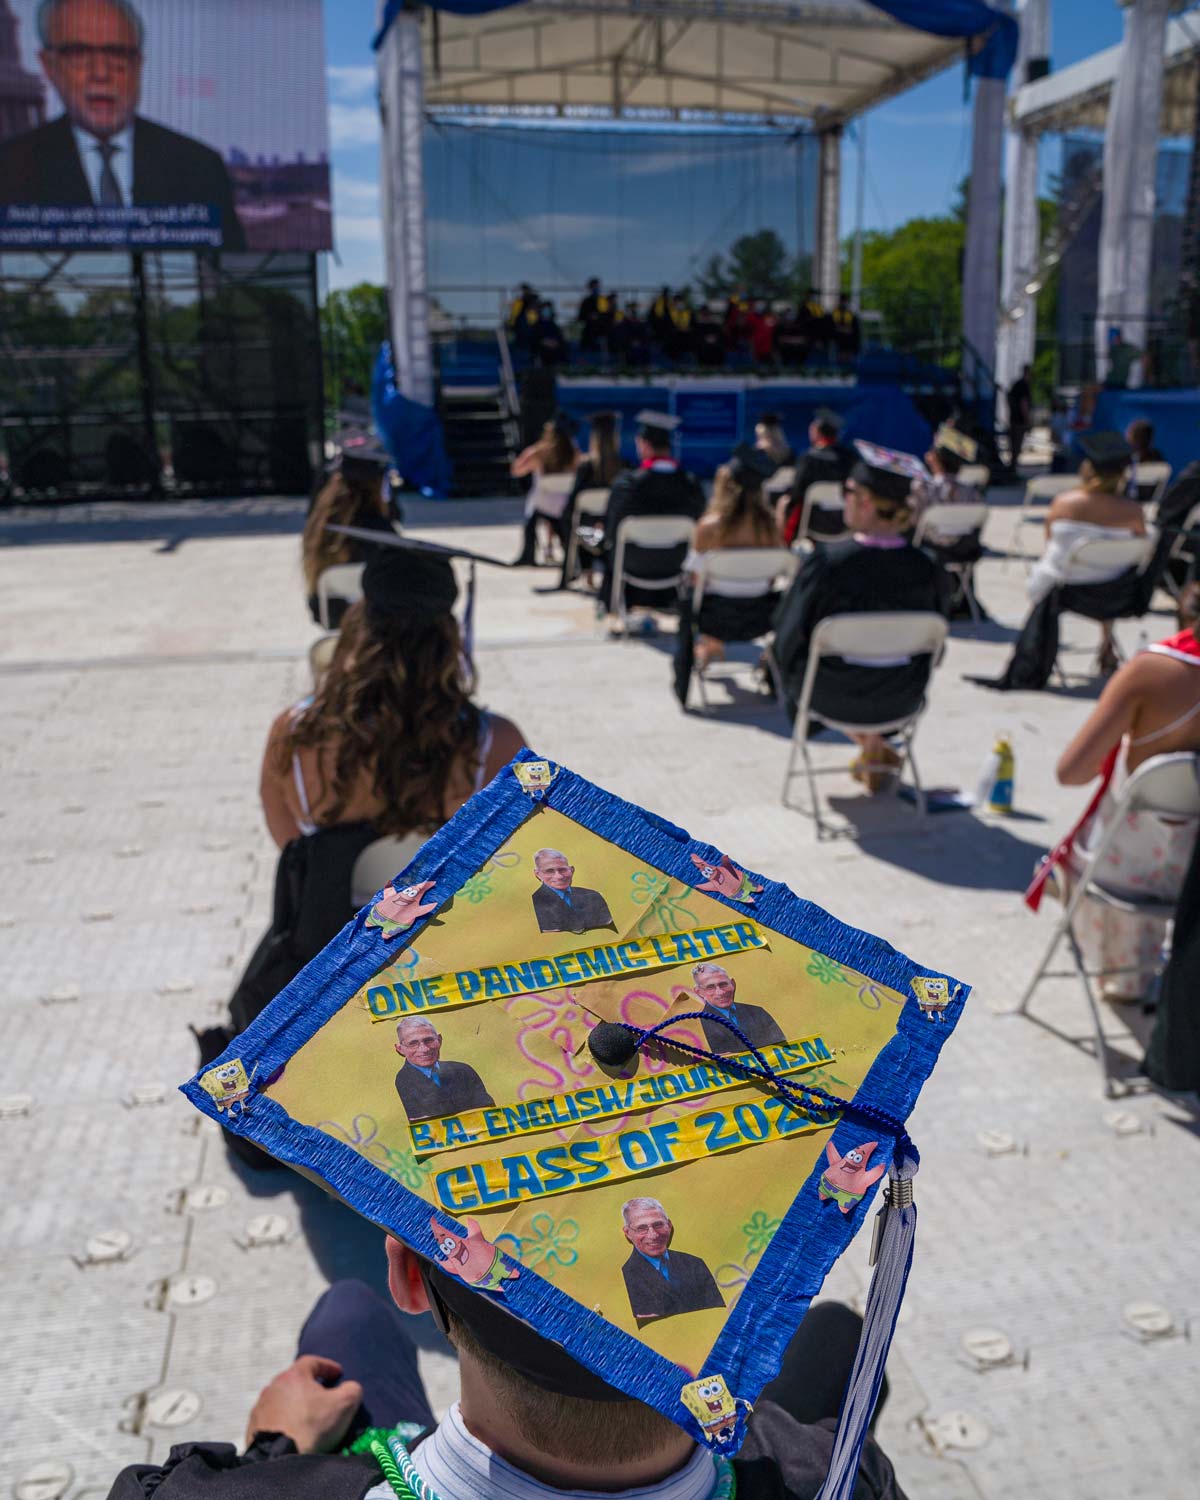 A student sports a Spongebob-themed graduation cap as he watches the commencement ceremony with his peers